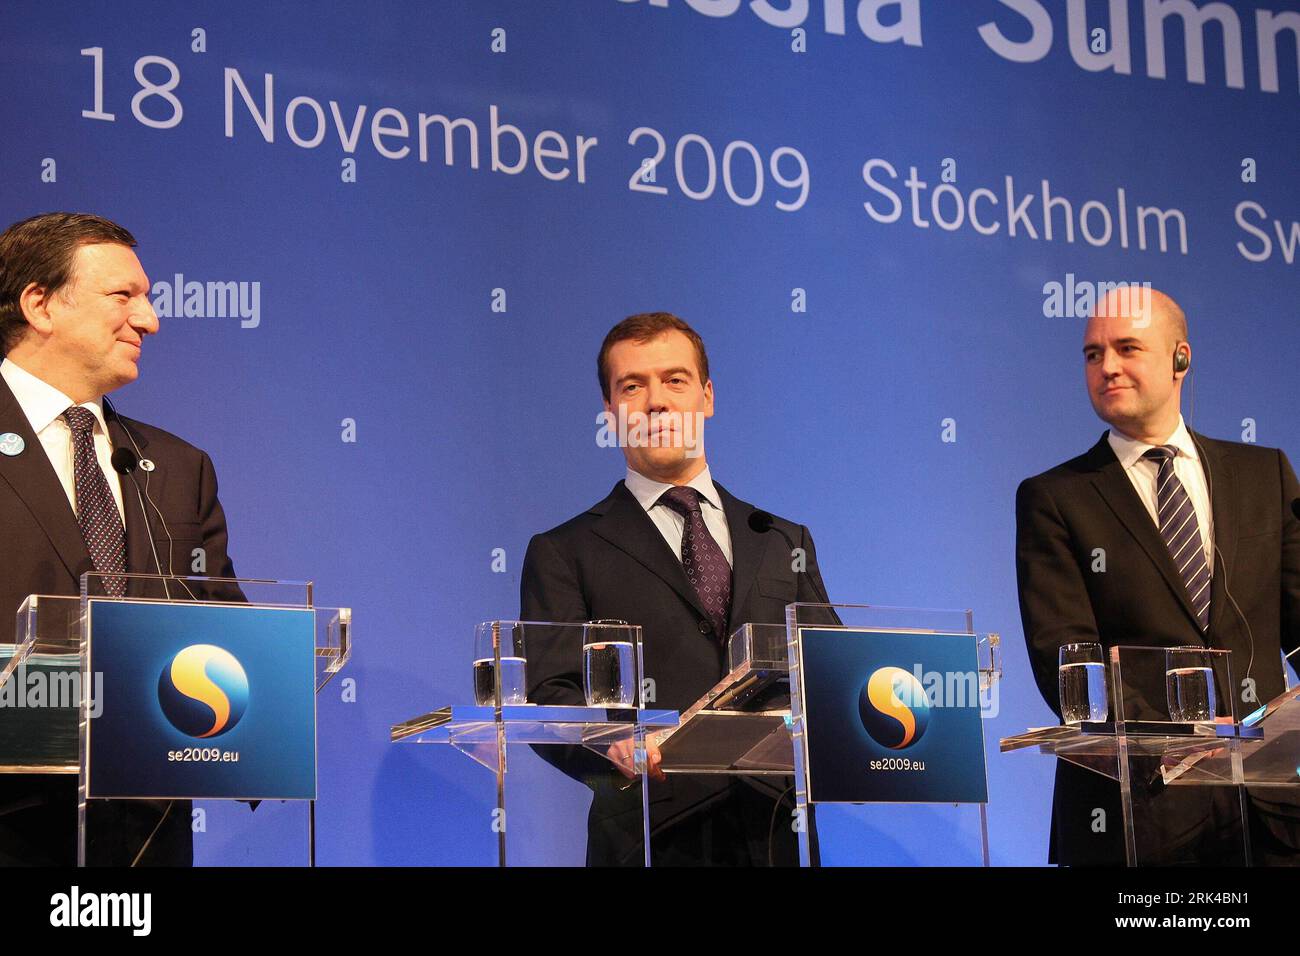 Bildnummer: 53610043  Datum: 18.11.2009  Copyright: imago/Xinhua (091118) -- STOCKHOLM, Nov. 18, 2009 (Xinhua) -- European Commison President Jose Manuel Barroso (L), Russian President Dmitry Medvedev (C) and Swedish Prime Minister Fredrick Reinfeldt attend a news conference after a one-day EU-Russia summit in Stockholm, capital of Sweden, Nov. 18, 2009. EU-Russian cooperation in climate and energy fields will be further intensified, the leaders from the EU and Russia said after the summit on Wednesday. (Xinhua/Wu Ping) (3)SWEDEN-EU-RUSSIA SUMMIT PUBLICATIONxNOTxINxCHN People Politik Russland Stock Photo